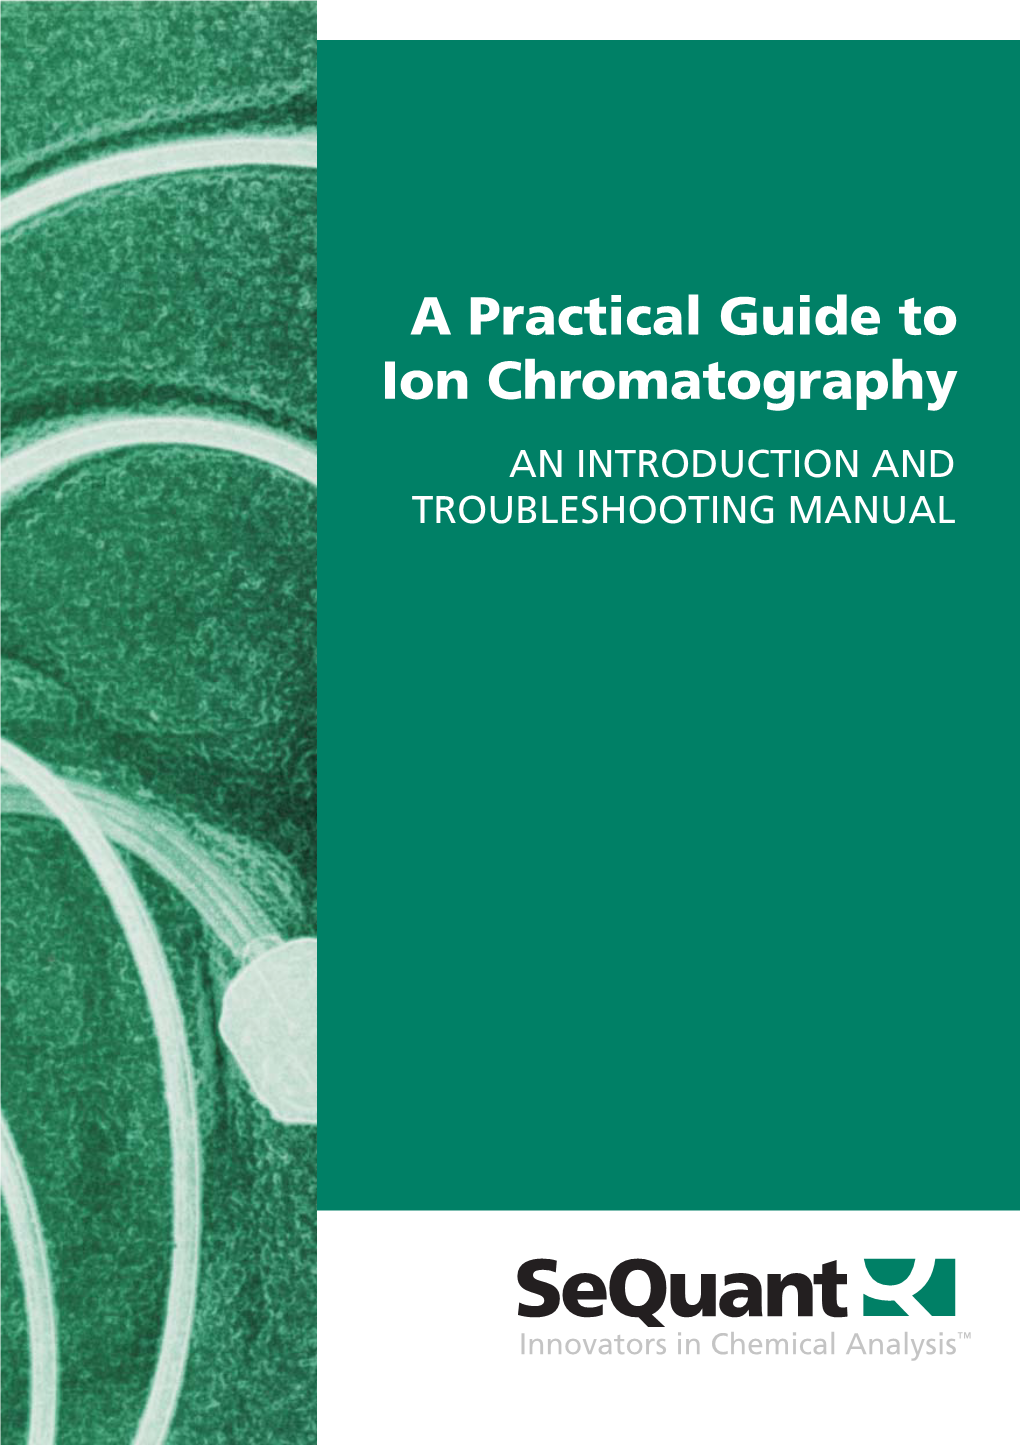 A Practical Guide to Ion Chromatography an INTRODUCTION and TROUBLESHOOTING MANUAL